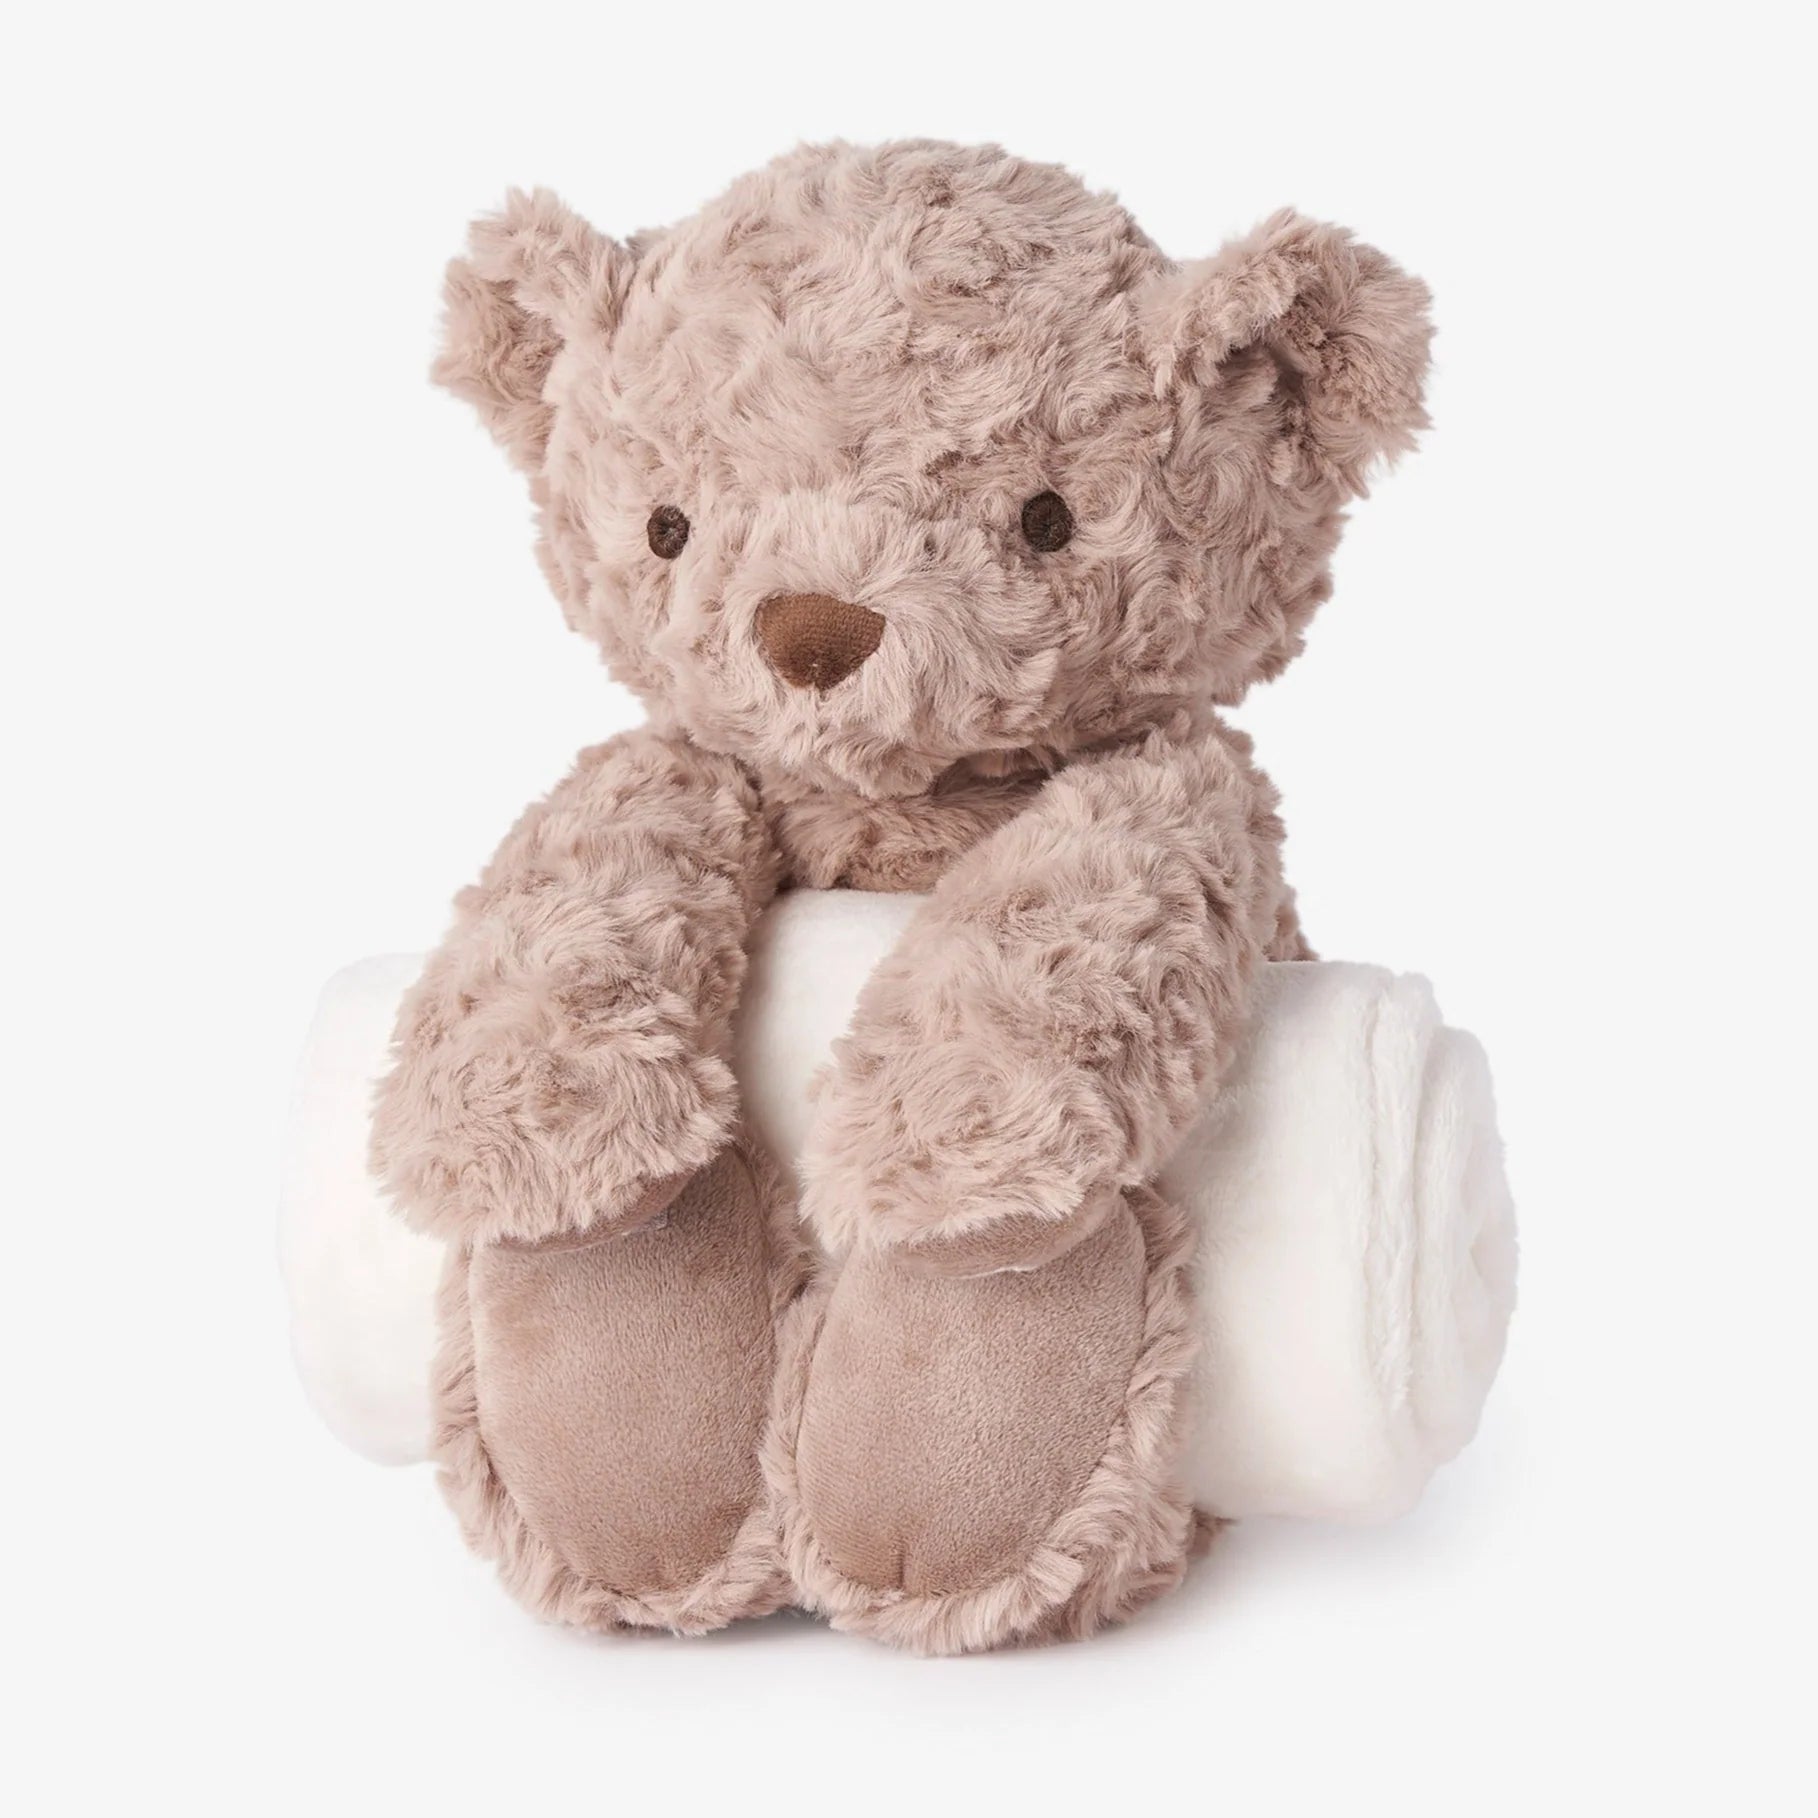 Bear bedtime huggie plush toy with blanket for baby